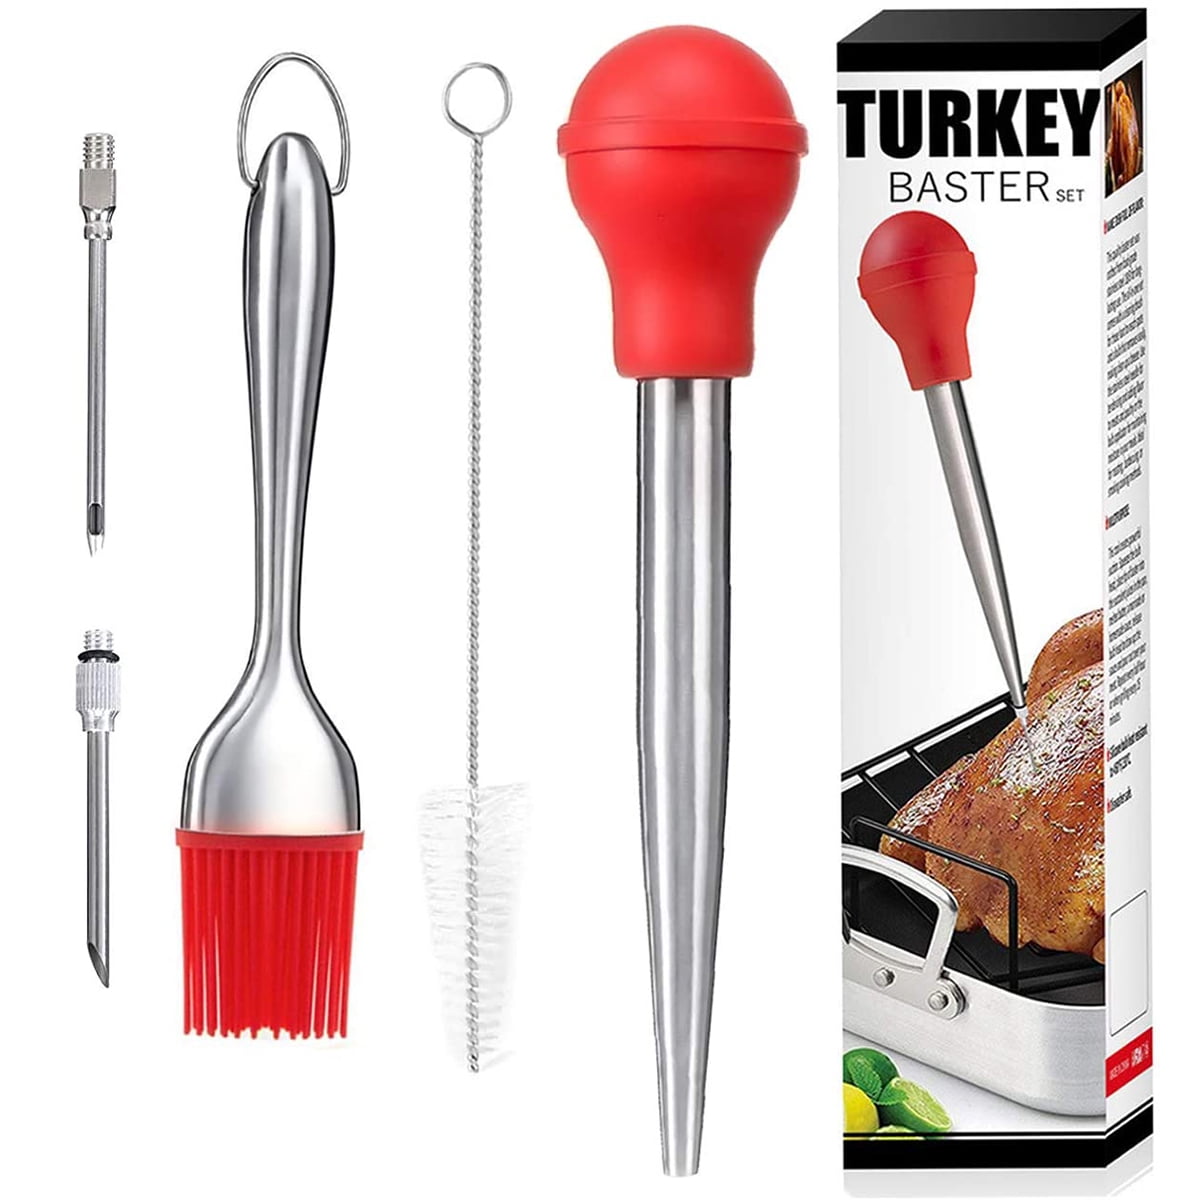 Stainless Steel Turkey Baster Set Heat-Resisting Turkey Chicken Baster Syringe Kits Meat Silicone Pump Injector for BBQ,L&S 2-Needle Tips. RED 